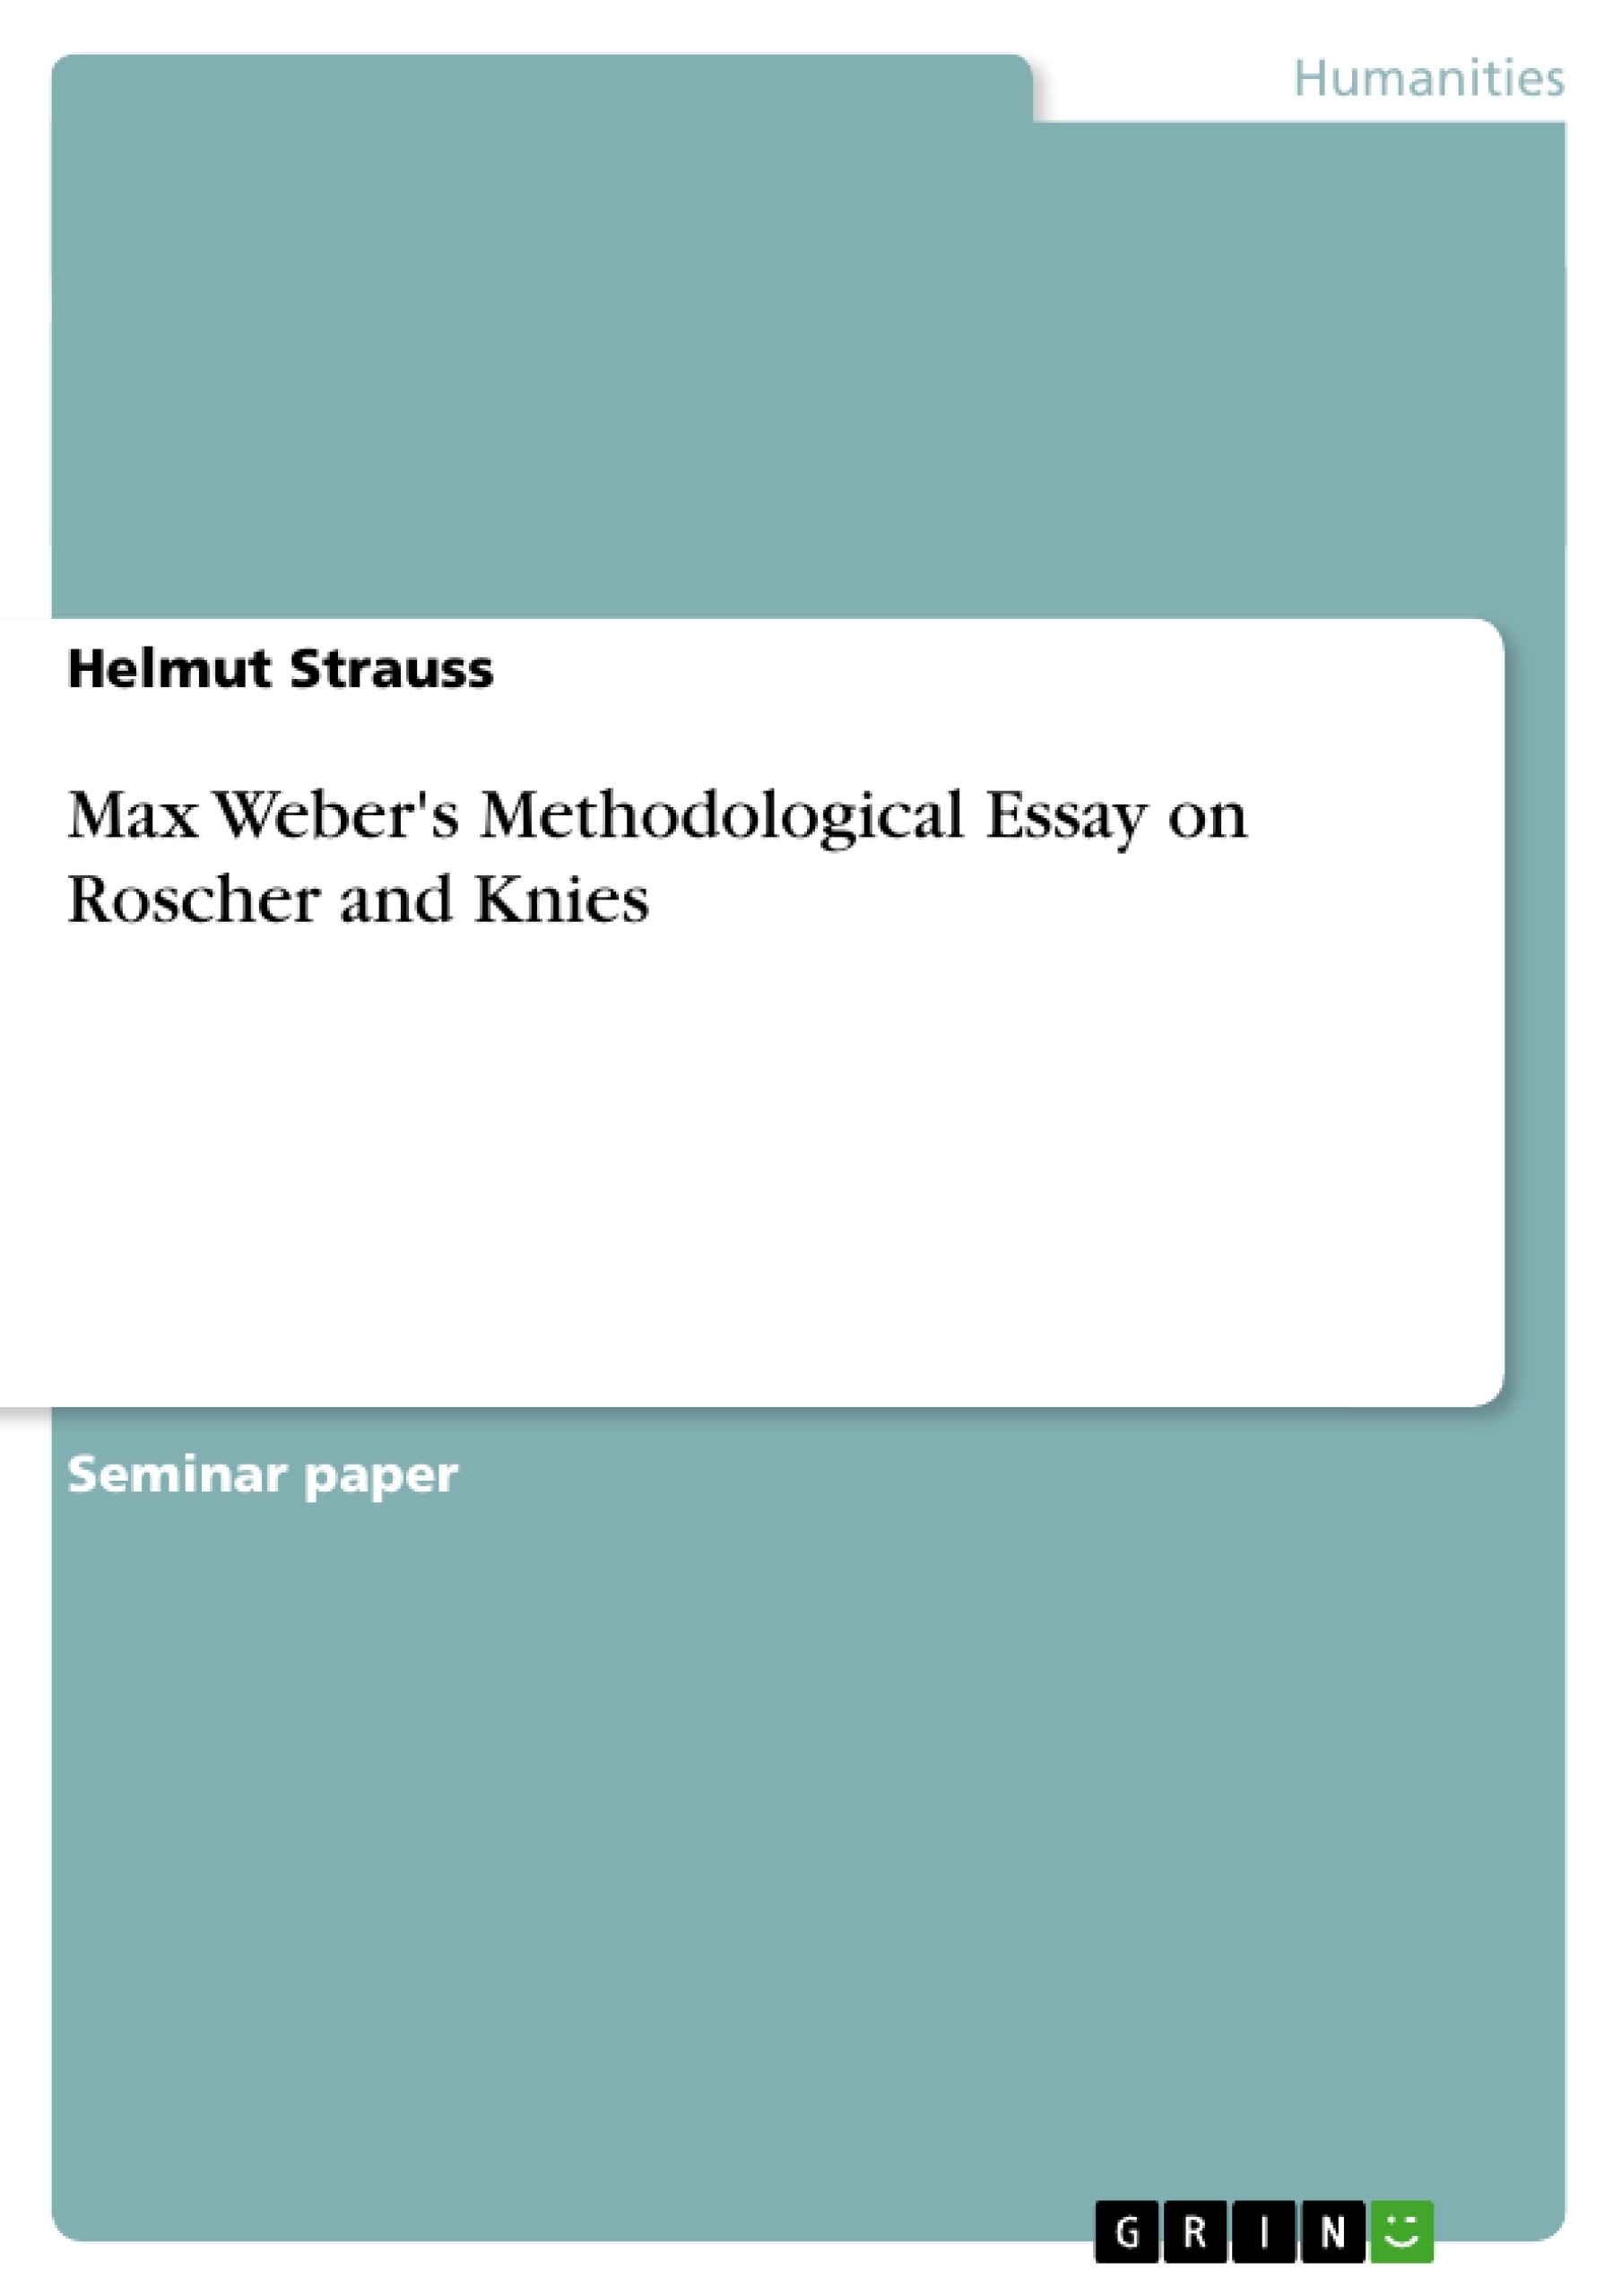 Title: Max Weber's Methodological Essay on Roscher and Knies